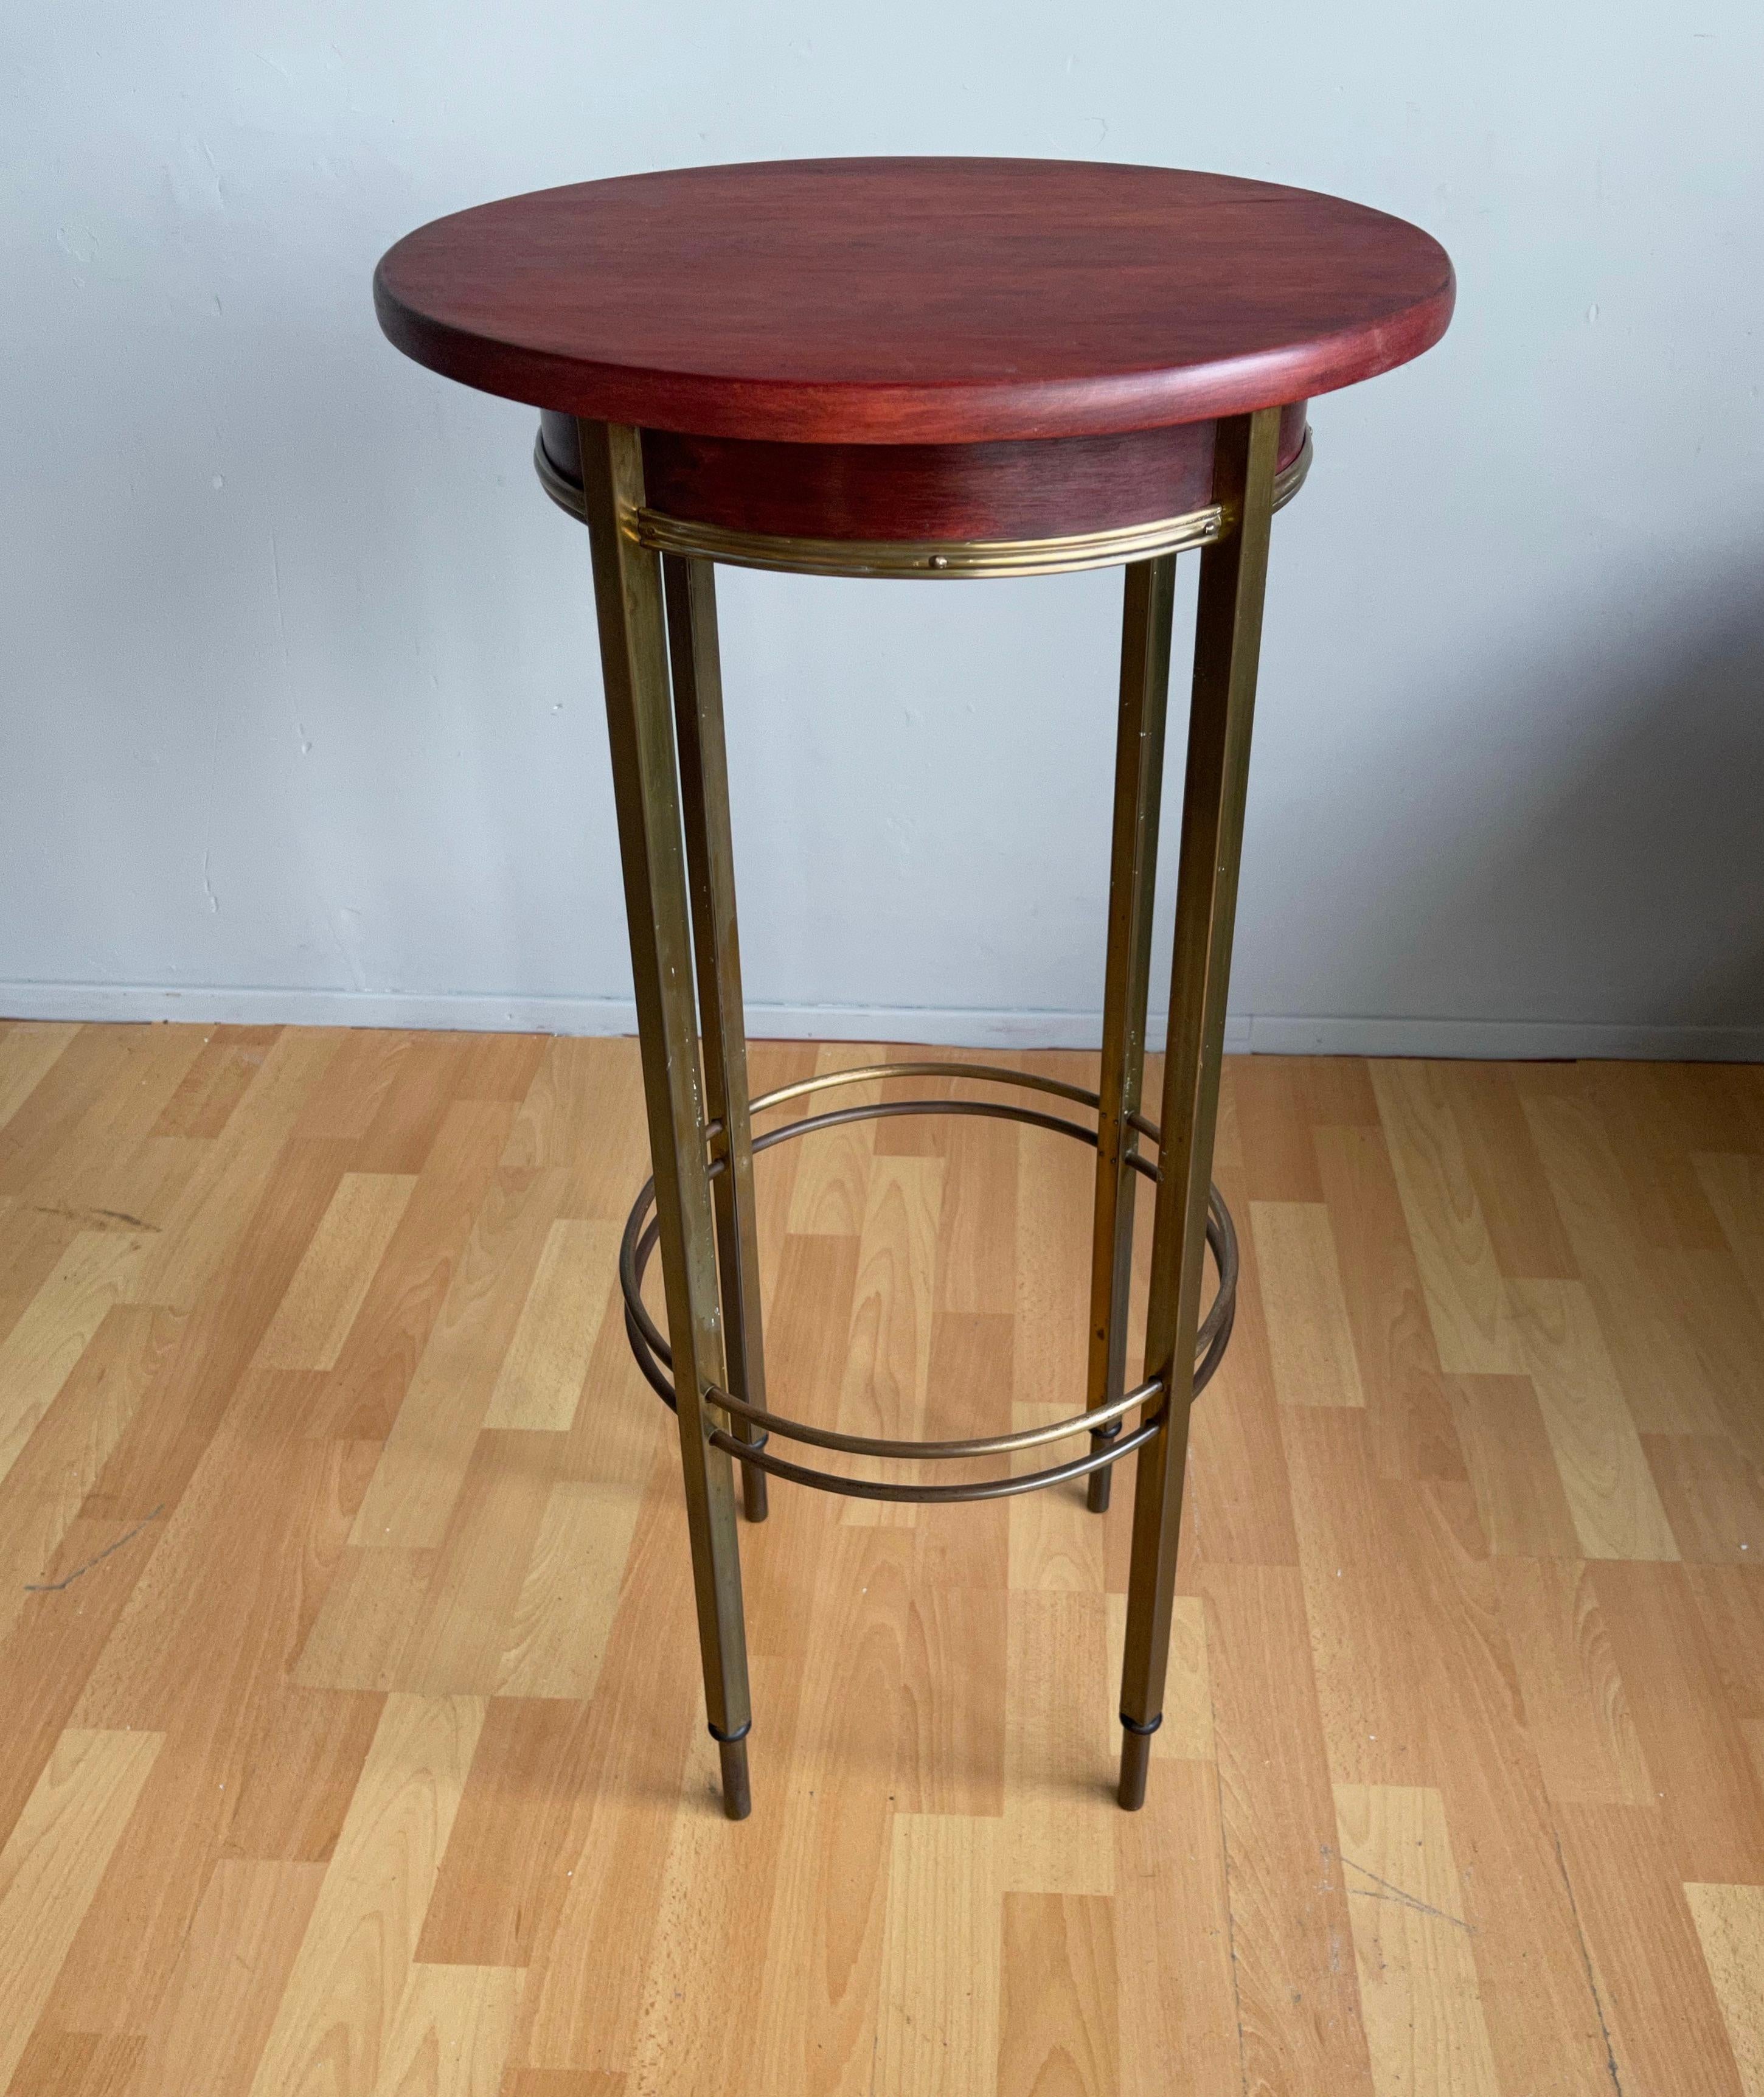 Arts and Crafts Rare Vienne Secession / Modernist Pedestal or Flower Stand by Ernst Rockhausen For Sale